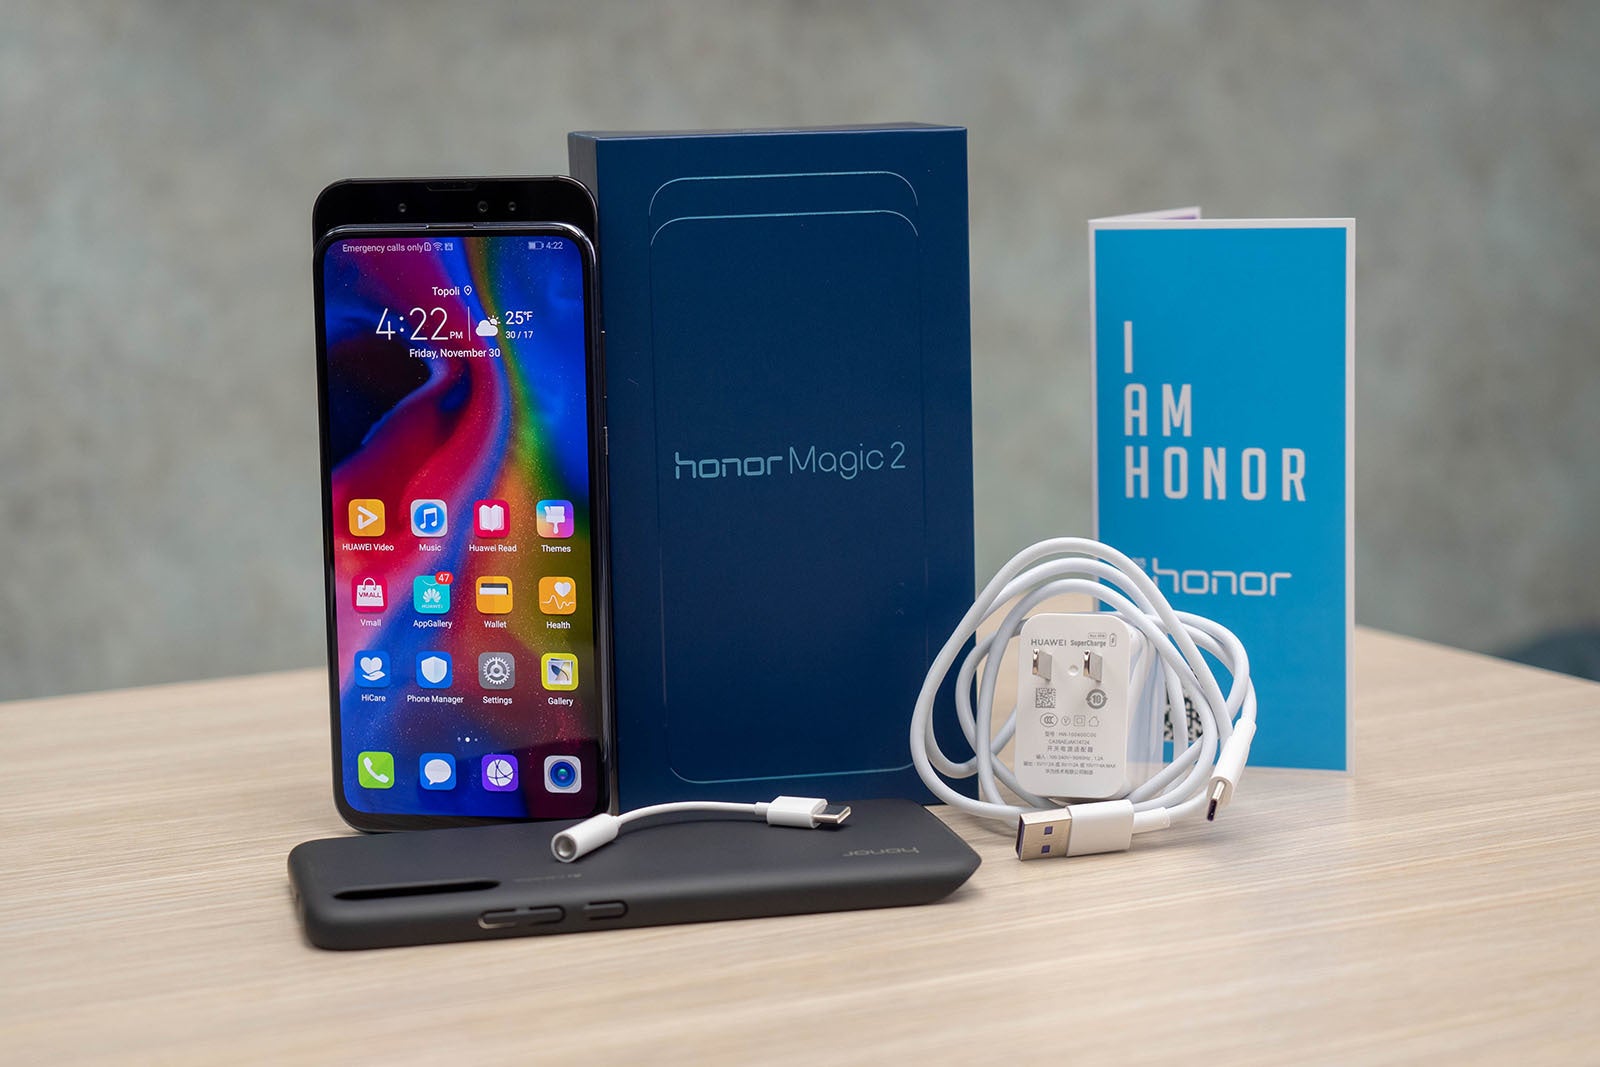 Honor Magic 2: unboxing and hands-on first look